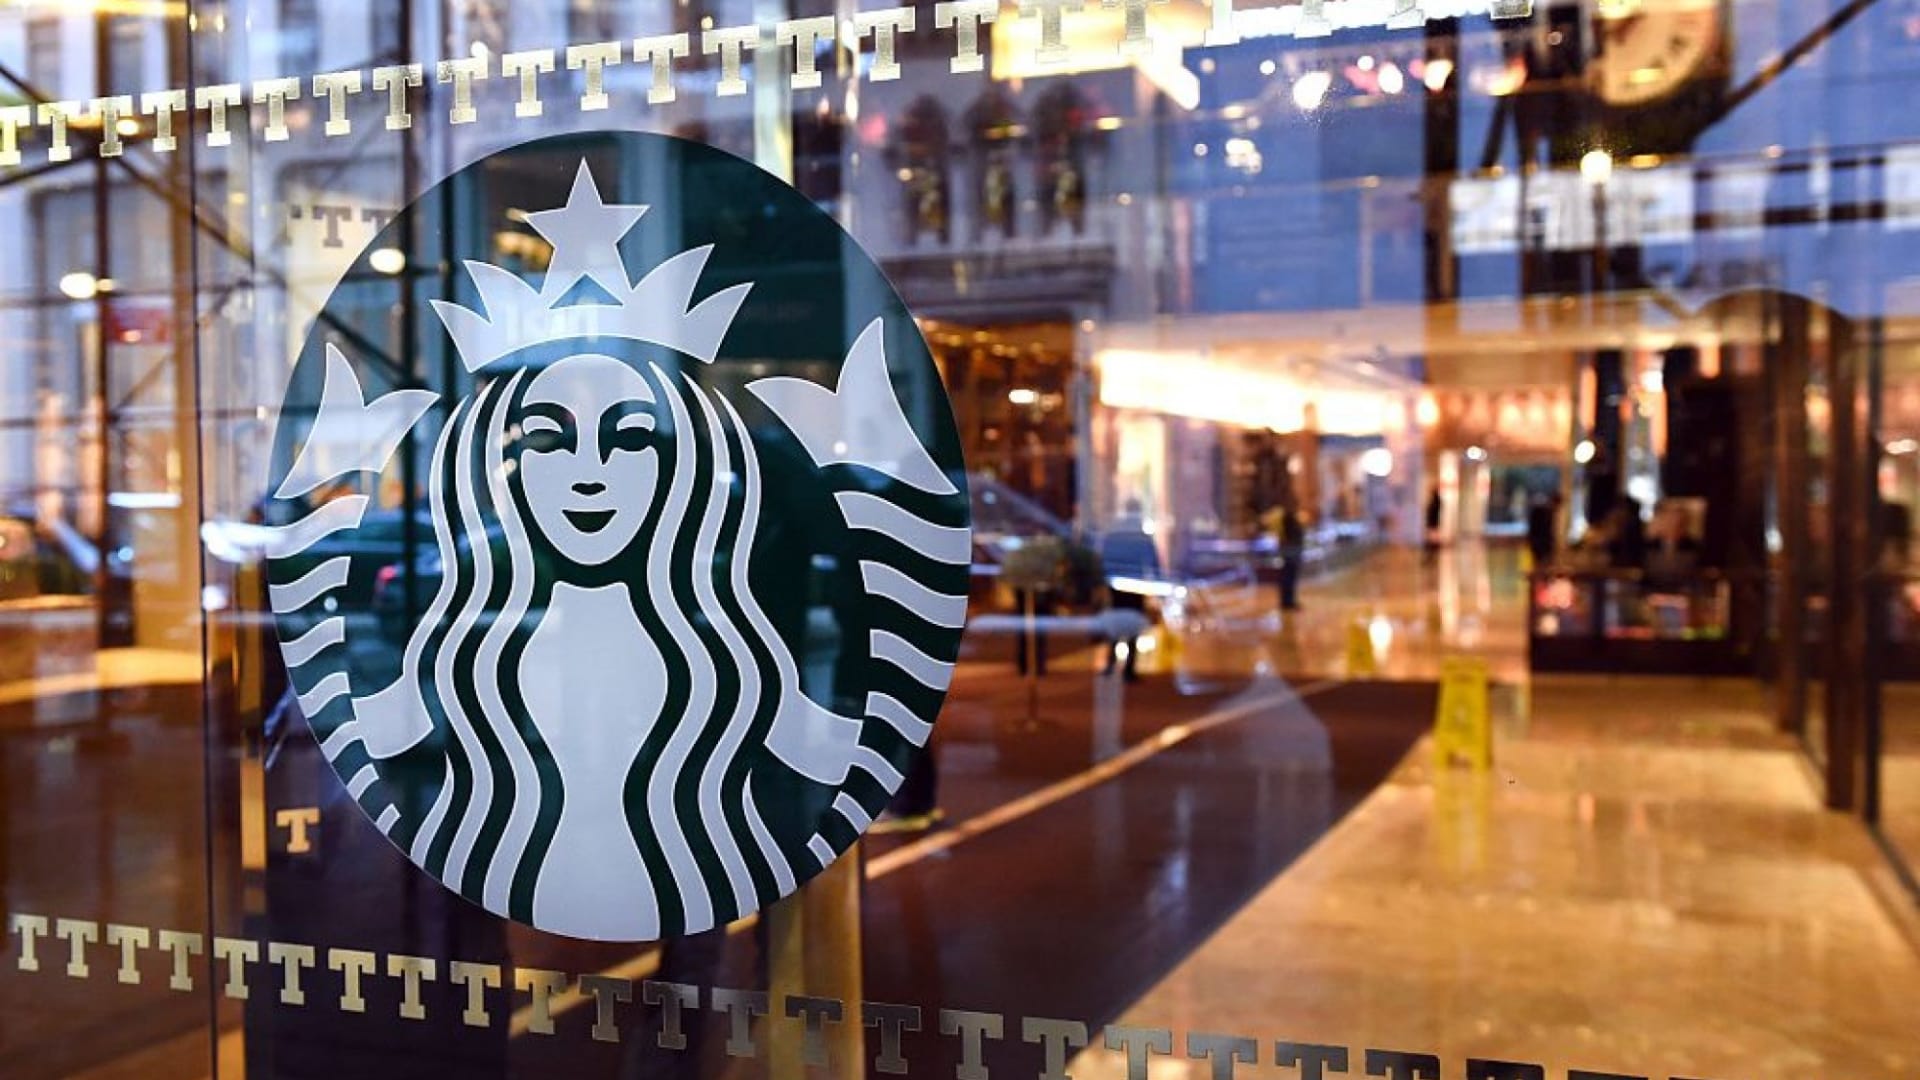 Starbucks's Black Friday Deal Made People Very Angry. It's What No Company Should Ever Do